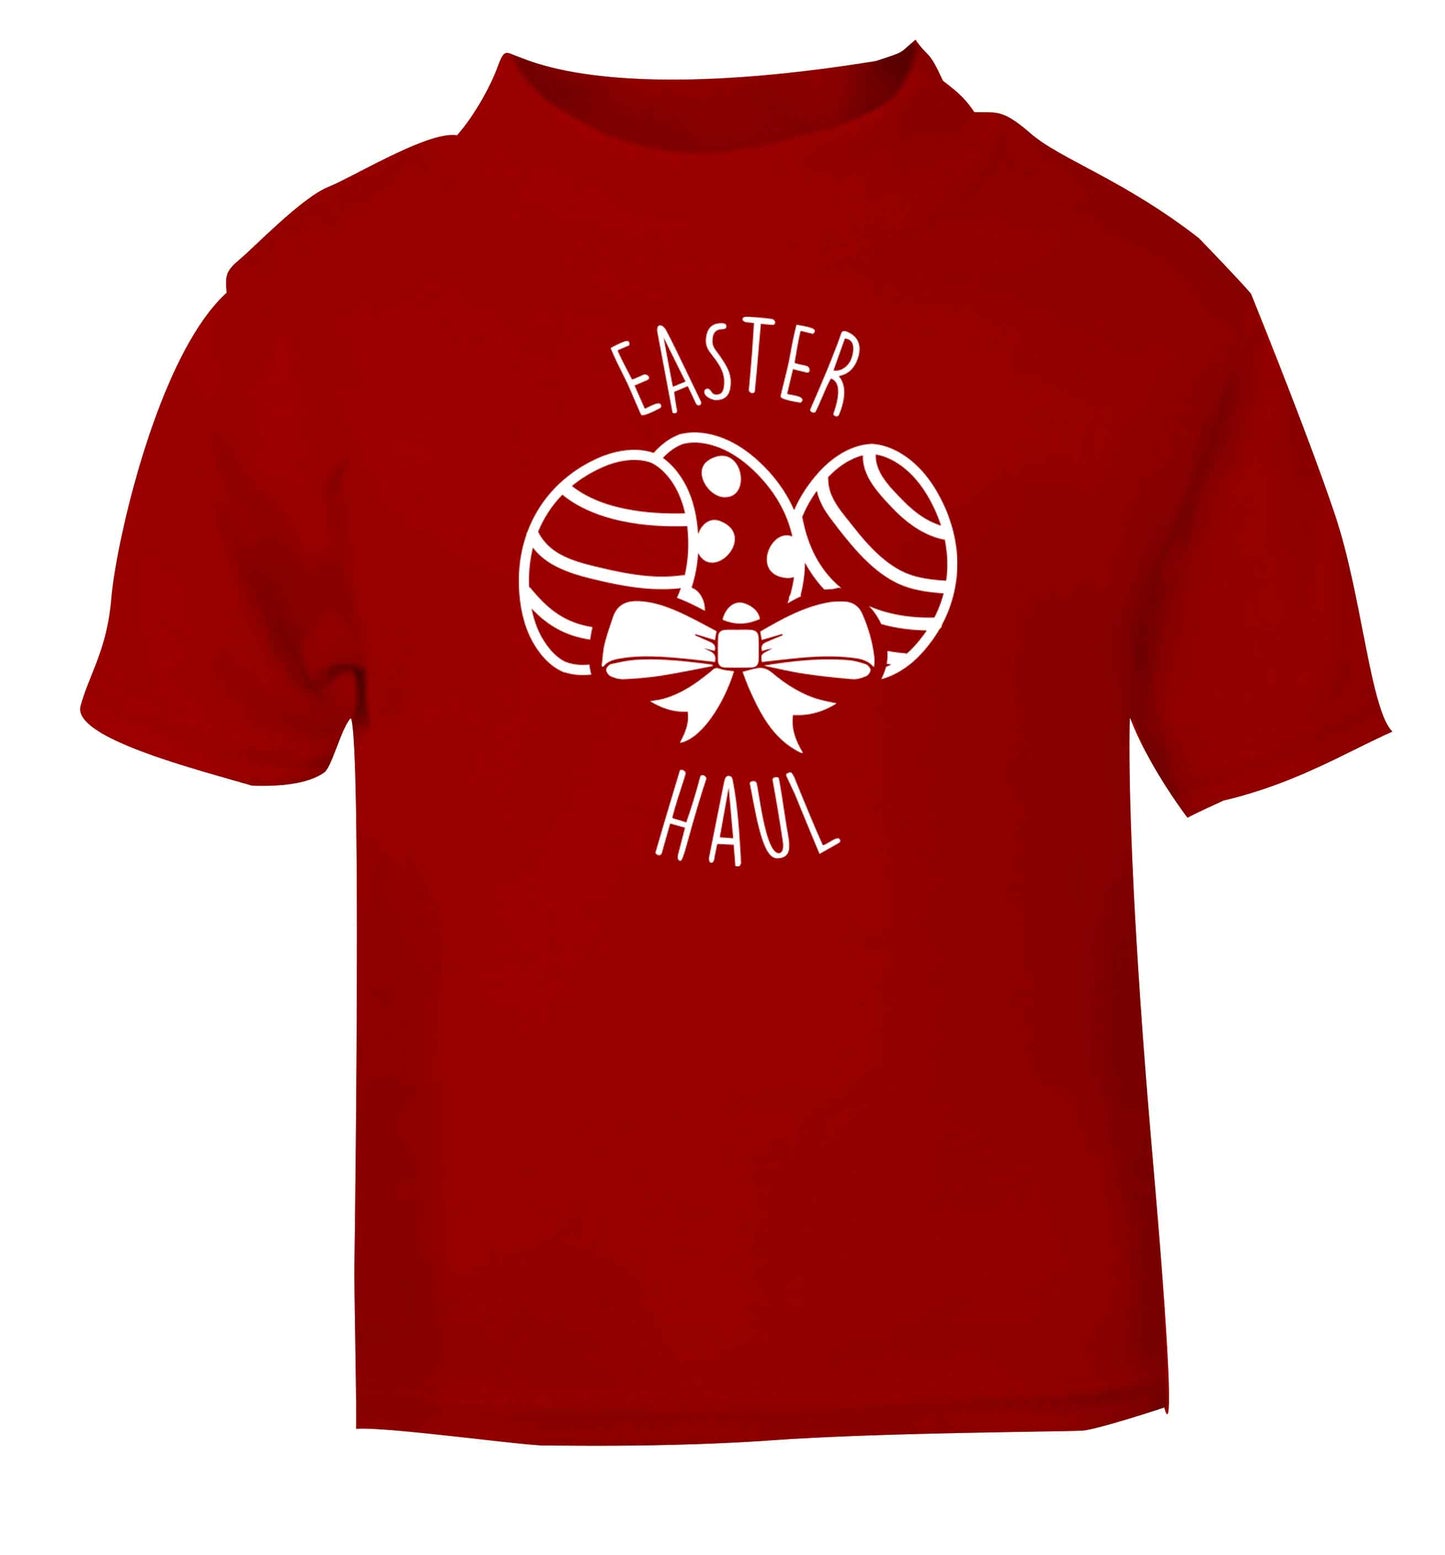 Easter haul red baby toddler Tshirt 2 Years